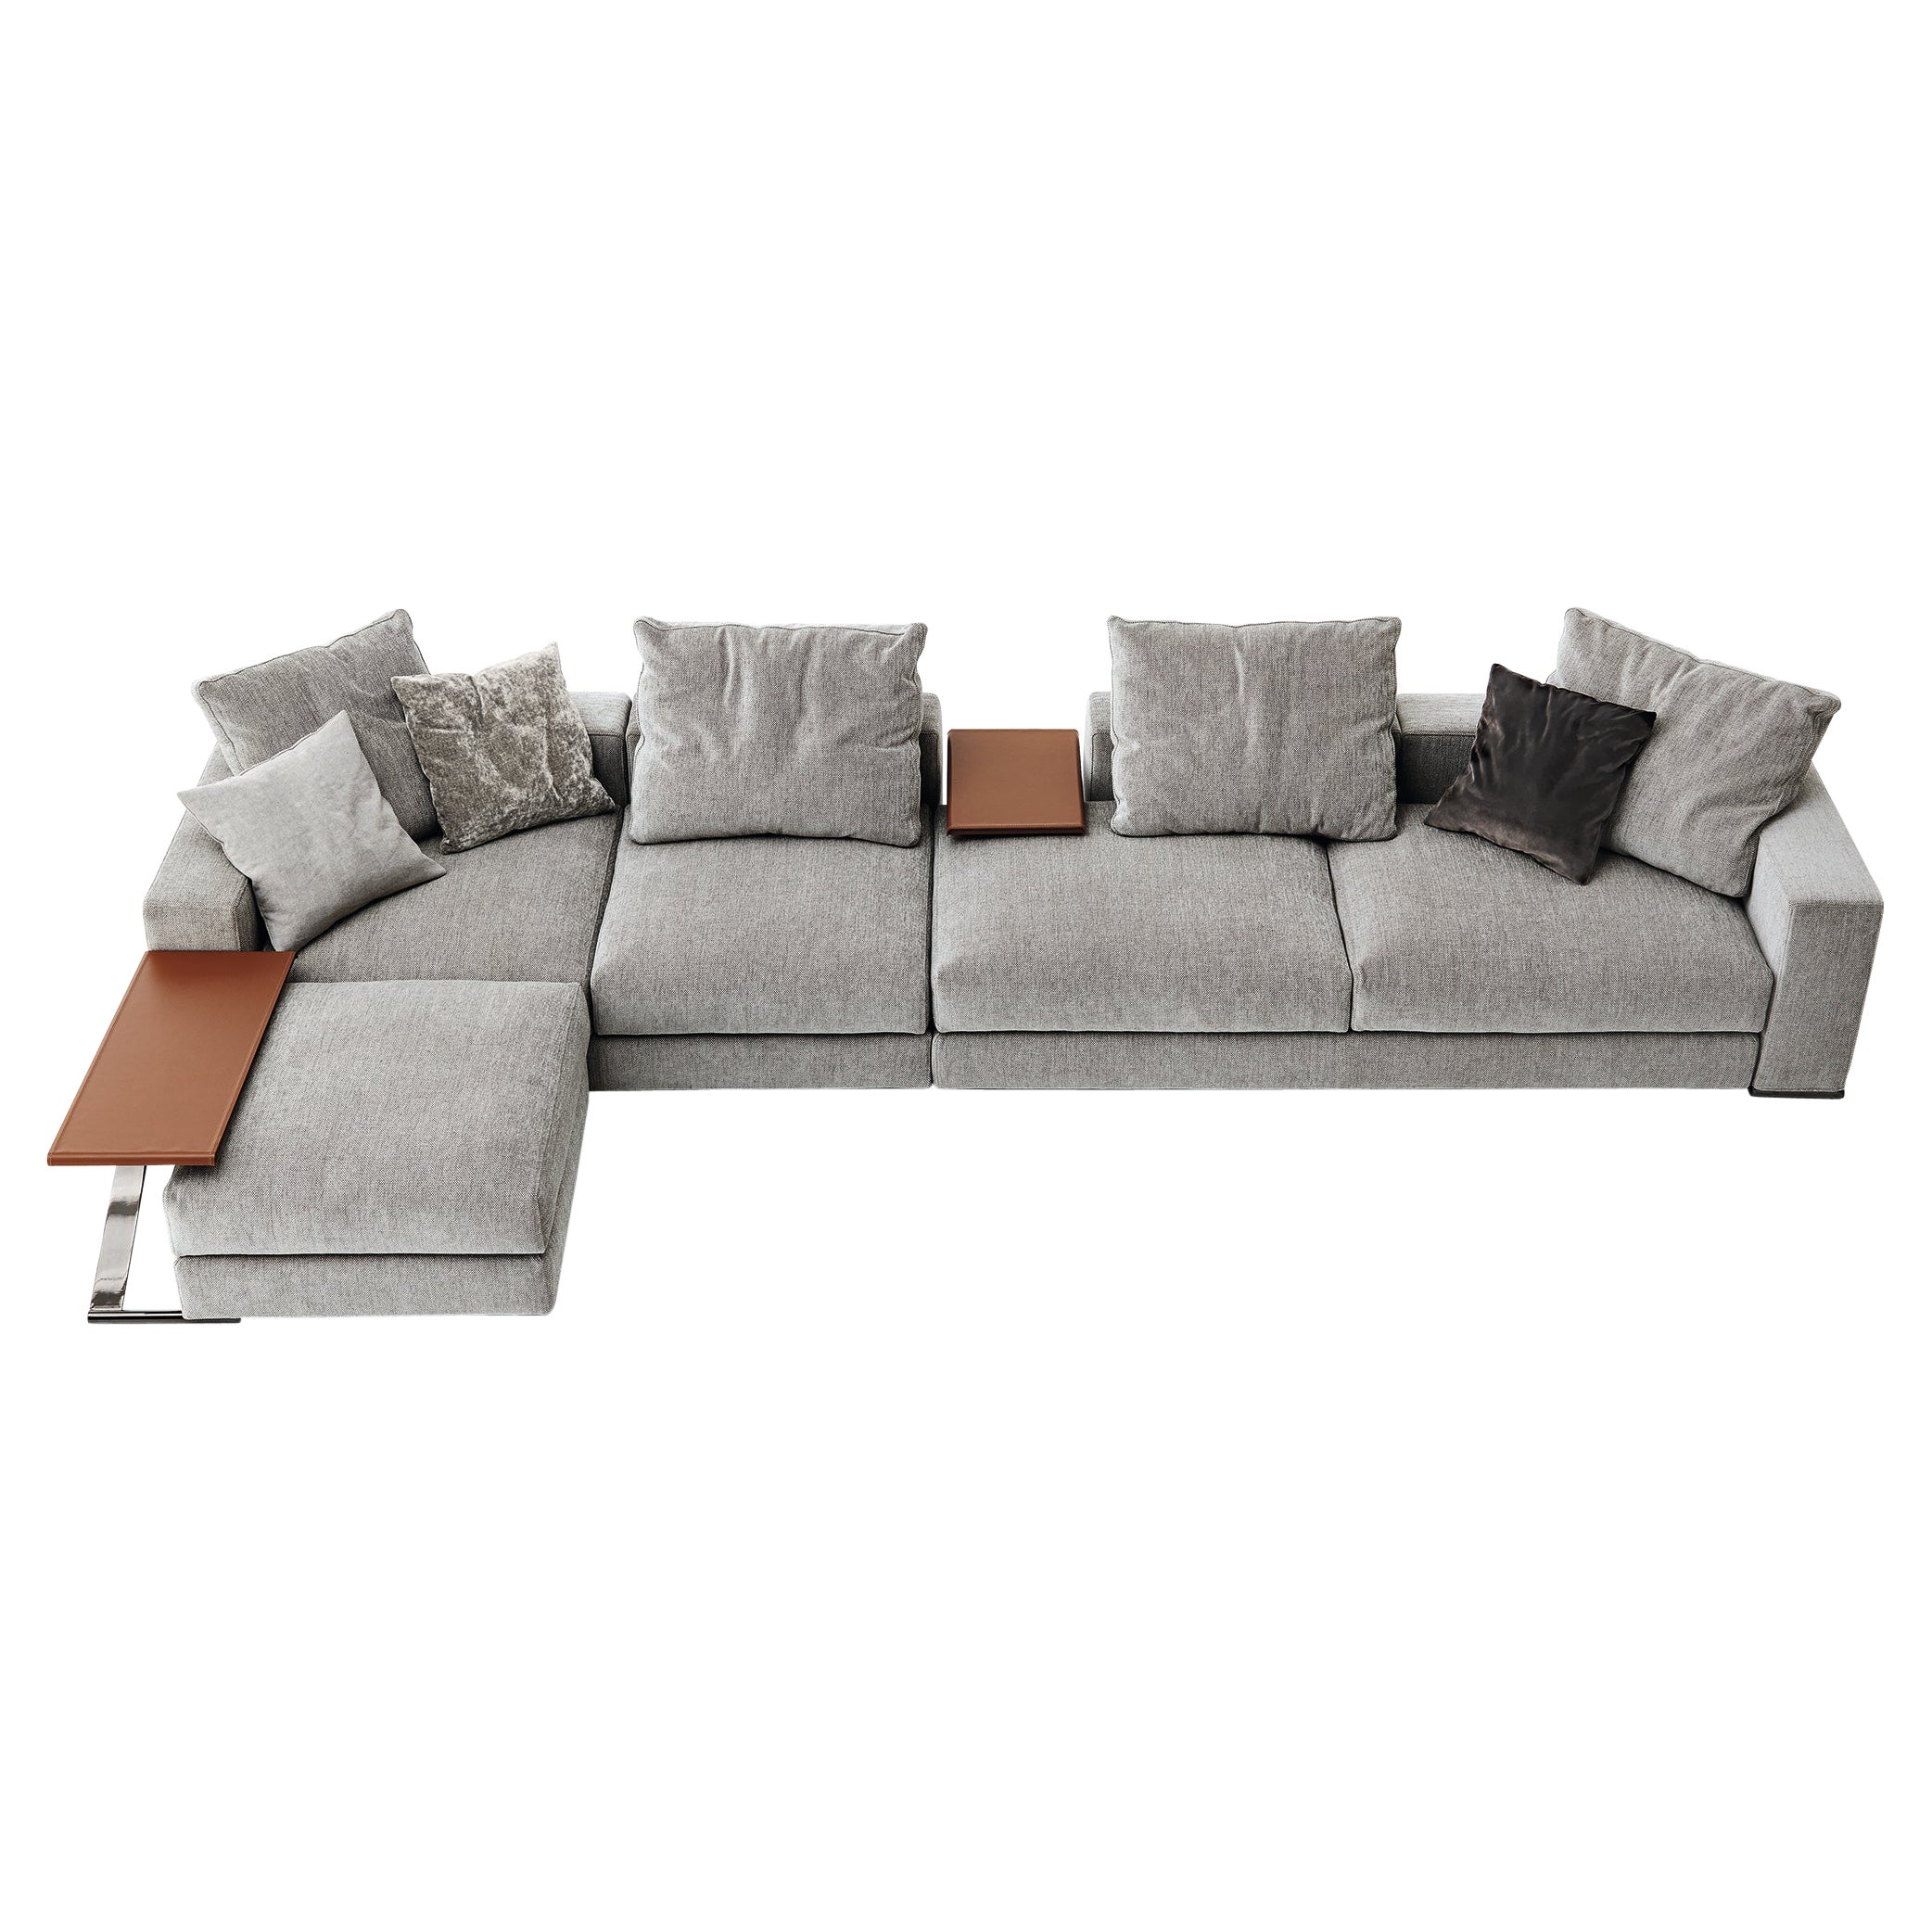 Ananta Class 15 Extra Large Sofa in Lusso Upholstery and Corten by Sergio Bicego For Sale